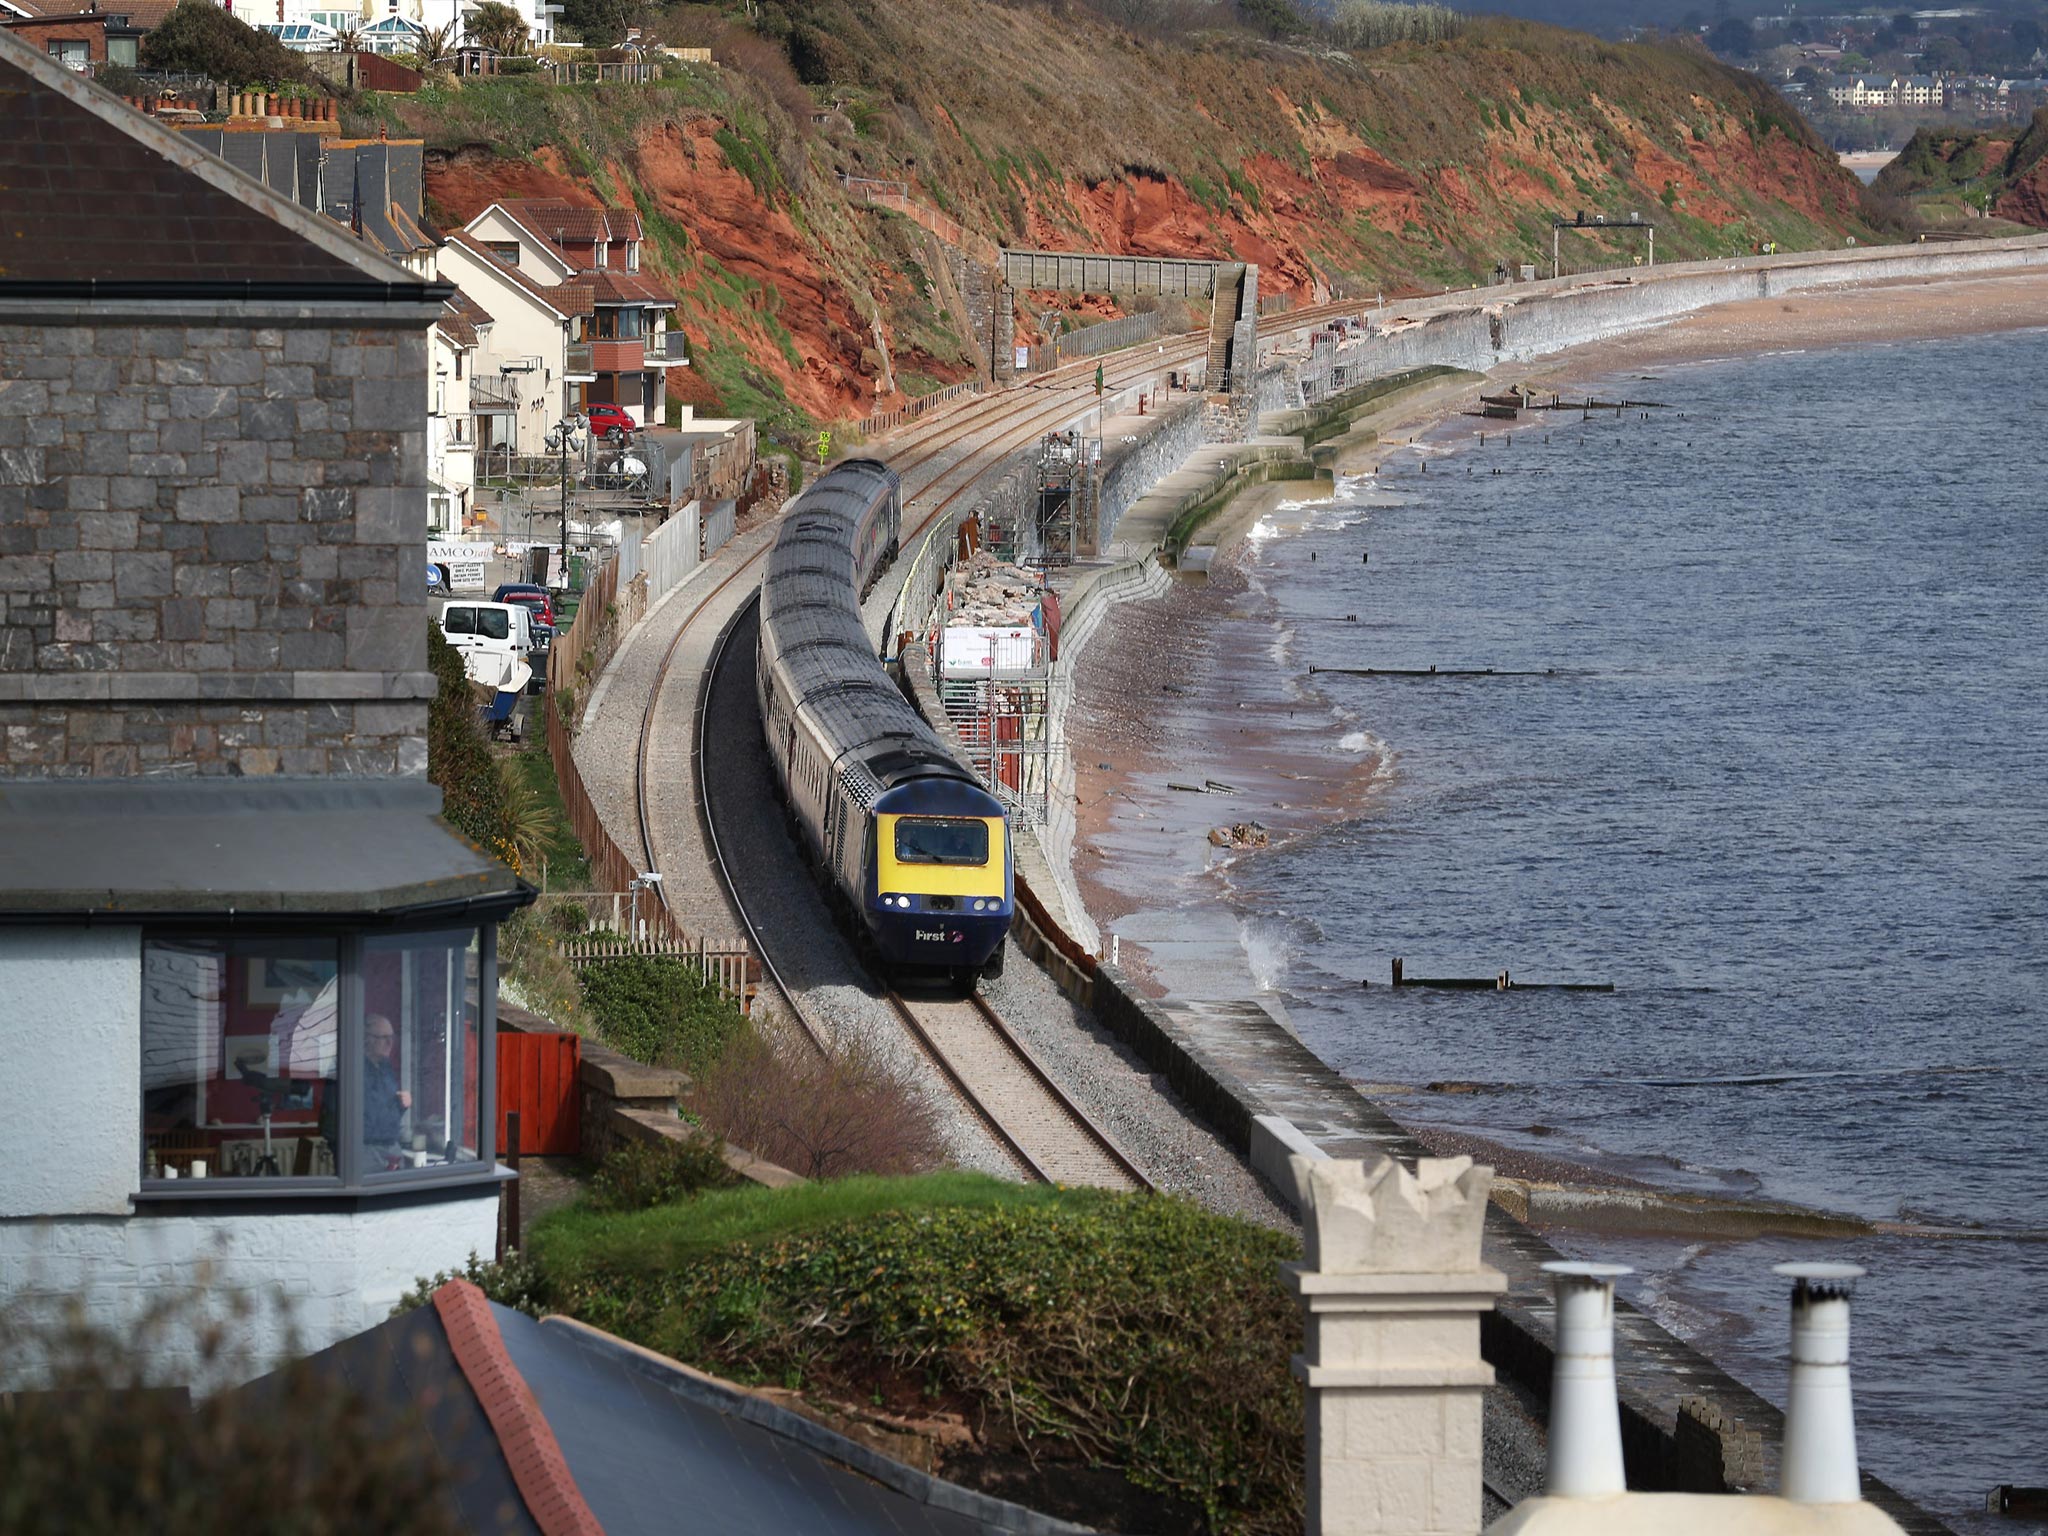 A train passes along the rebuilt track in Dawlish